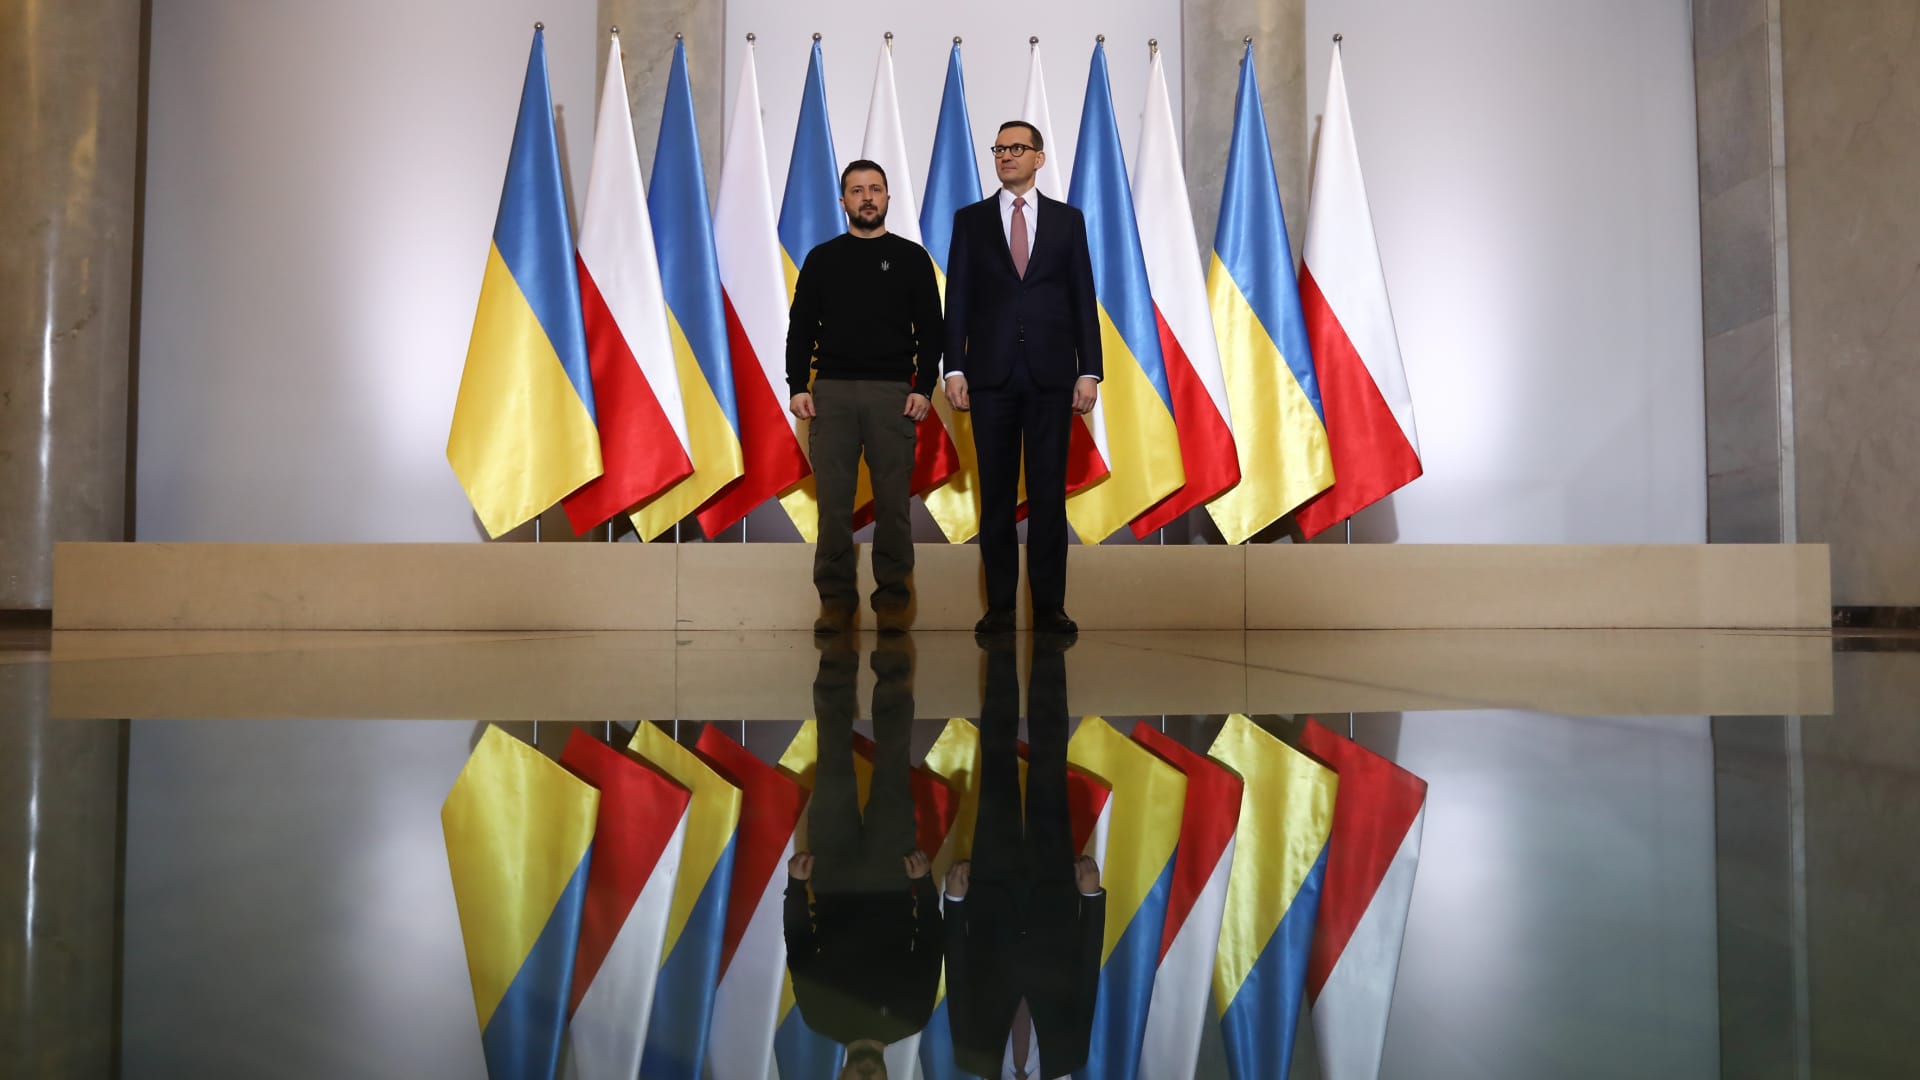 President of Ukraine Volodymyr Zelensky and Prime Minister of Poland Mateusz Morawiecki during their meeting in Warsaw, Poland on April 5, 2023.